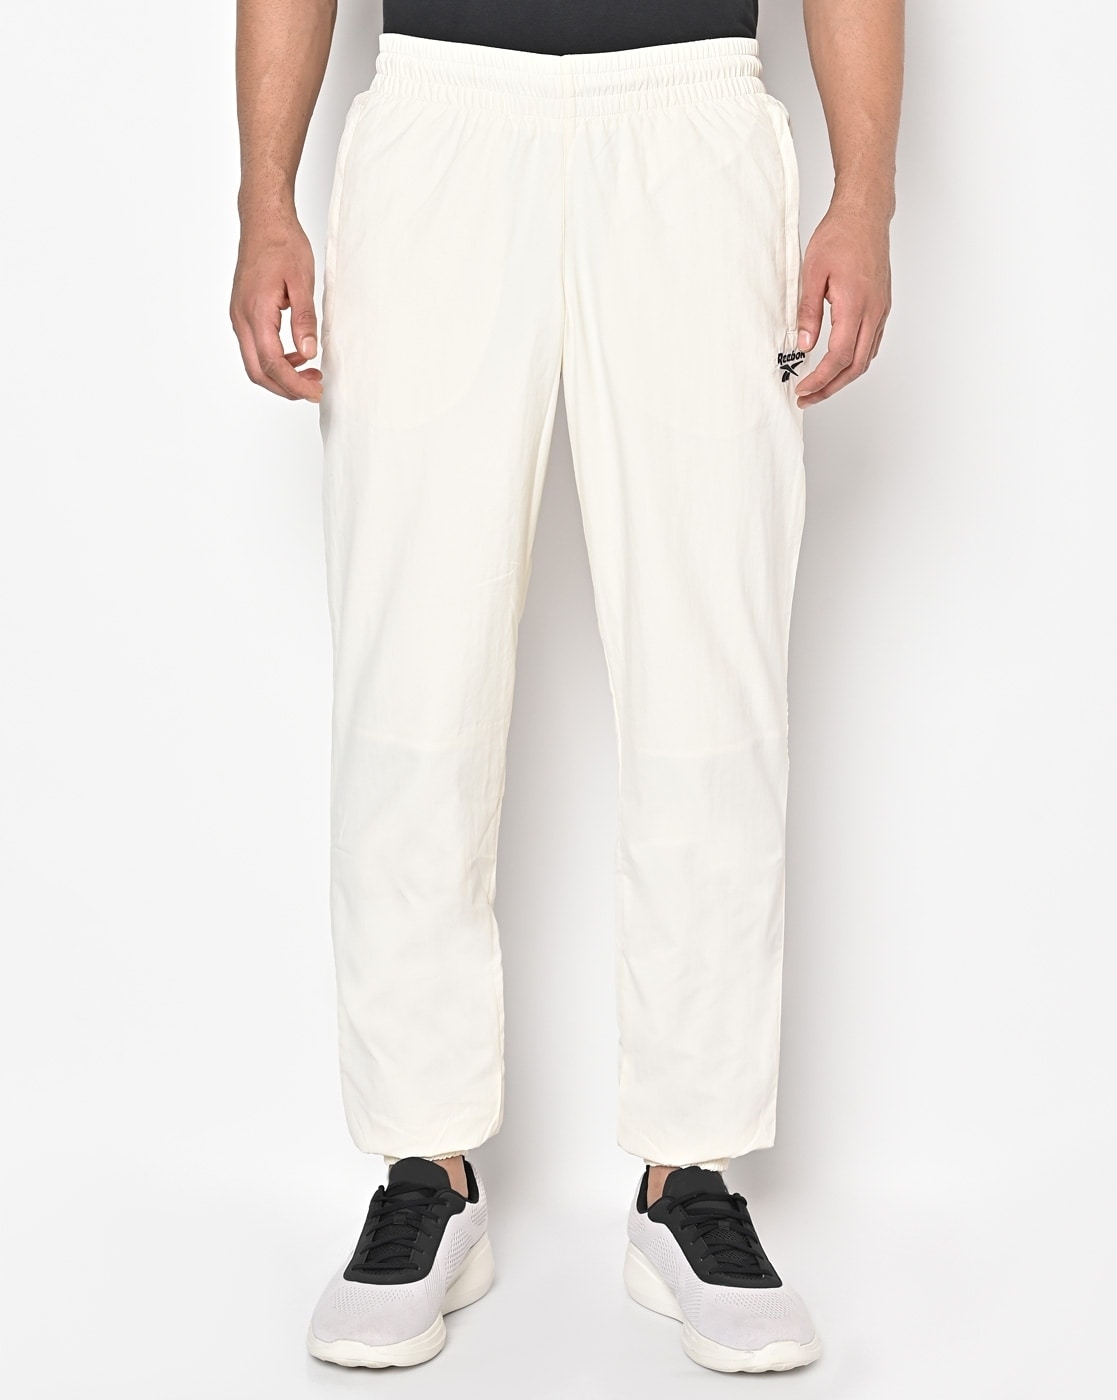 Reebok Classics Trackpants  Buy Reebok Classics Cl F Twin Vector Tp White  Casual Track Pant Online  Nykaa Fashion